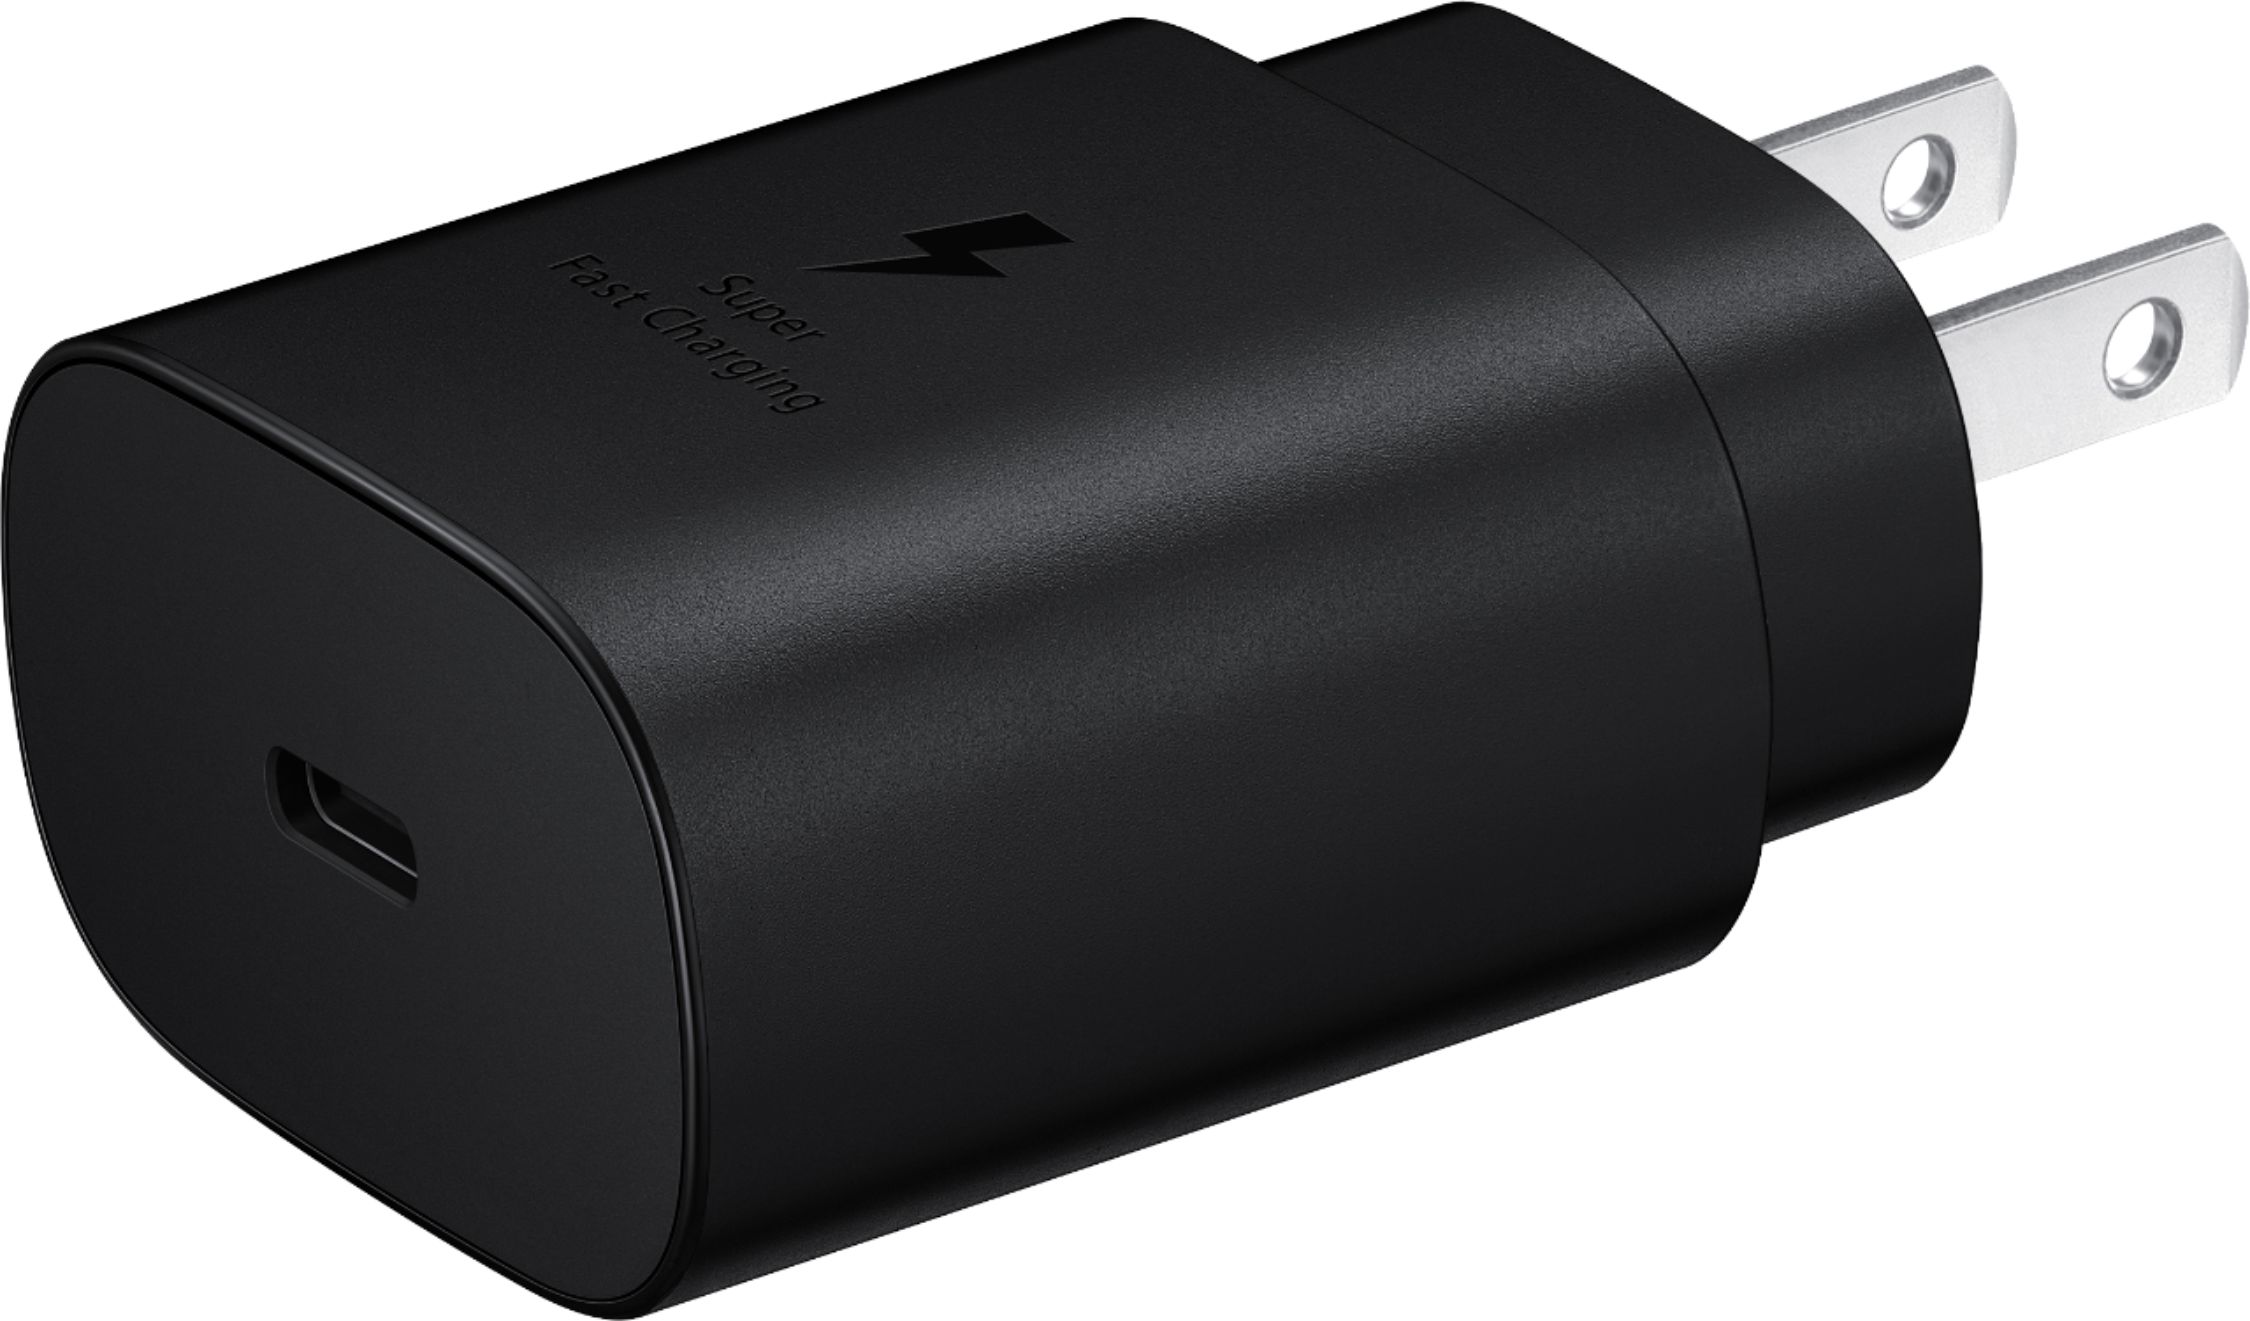 Samsung 25W Super Fast Wall Charger - Black